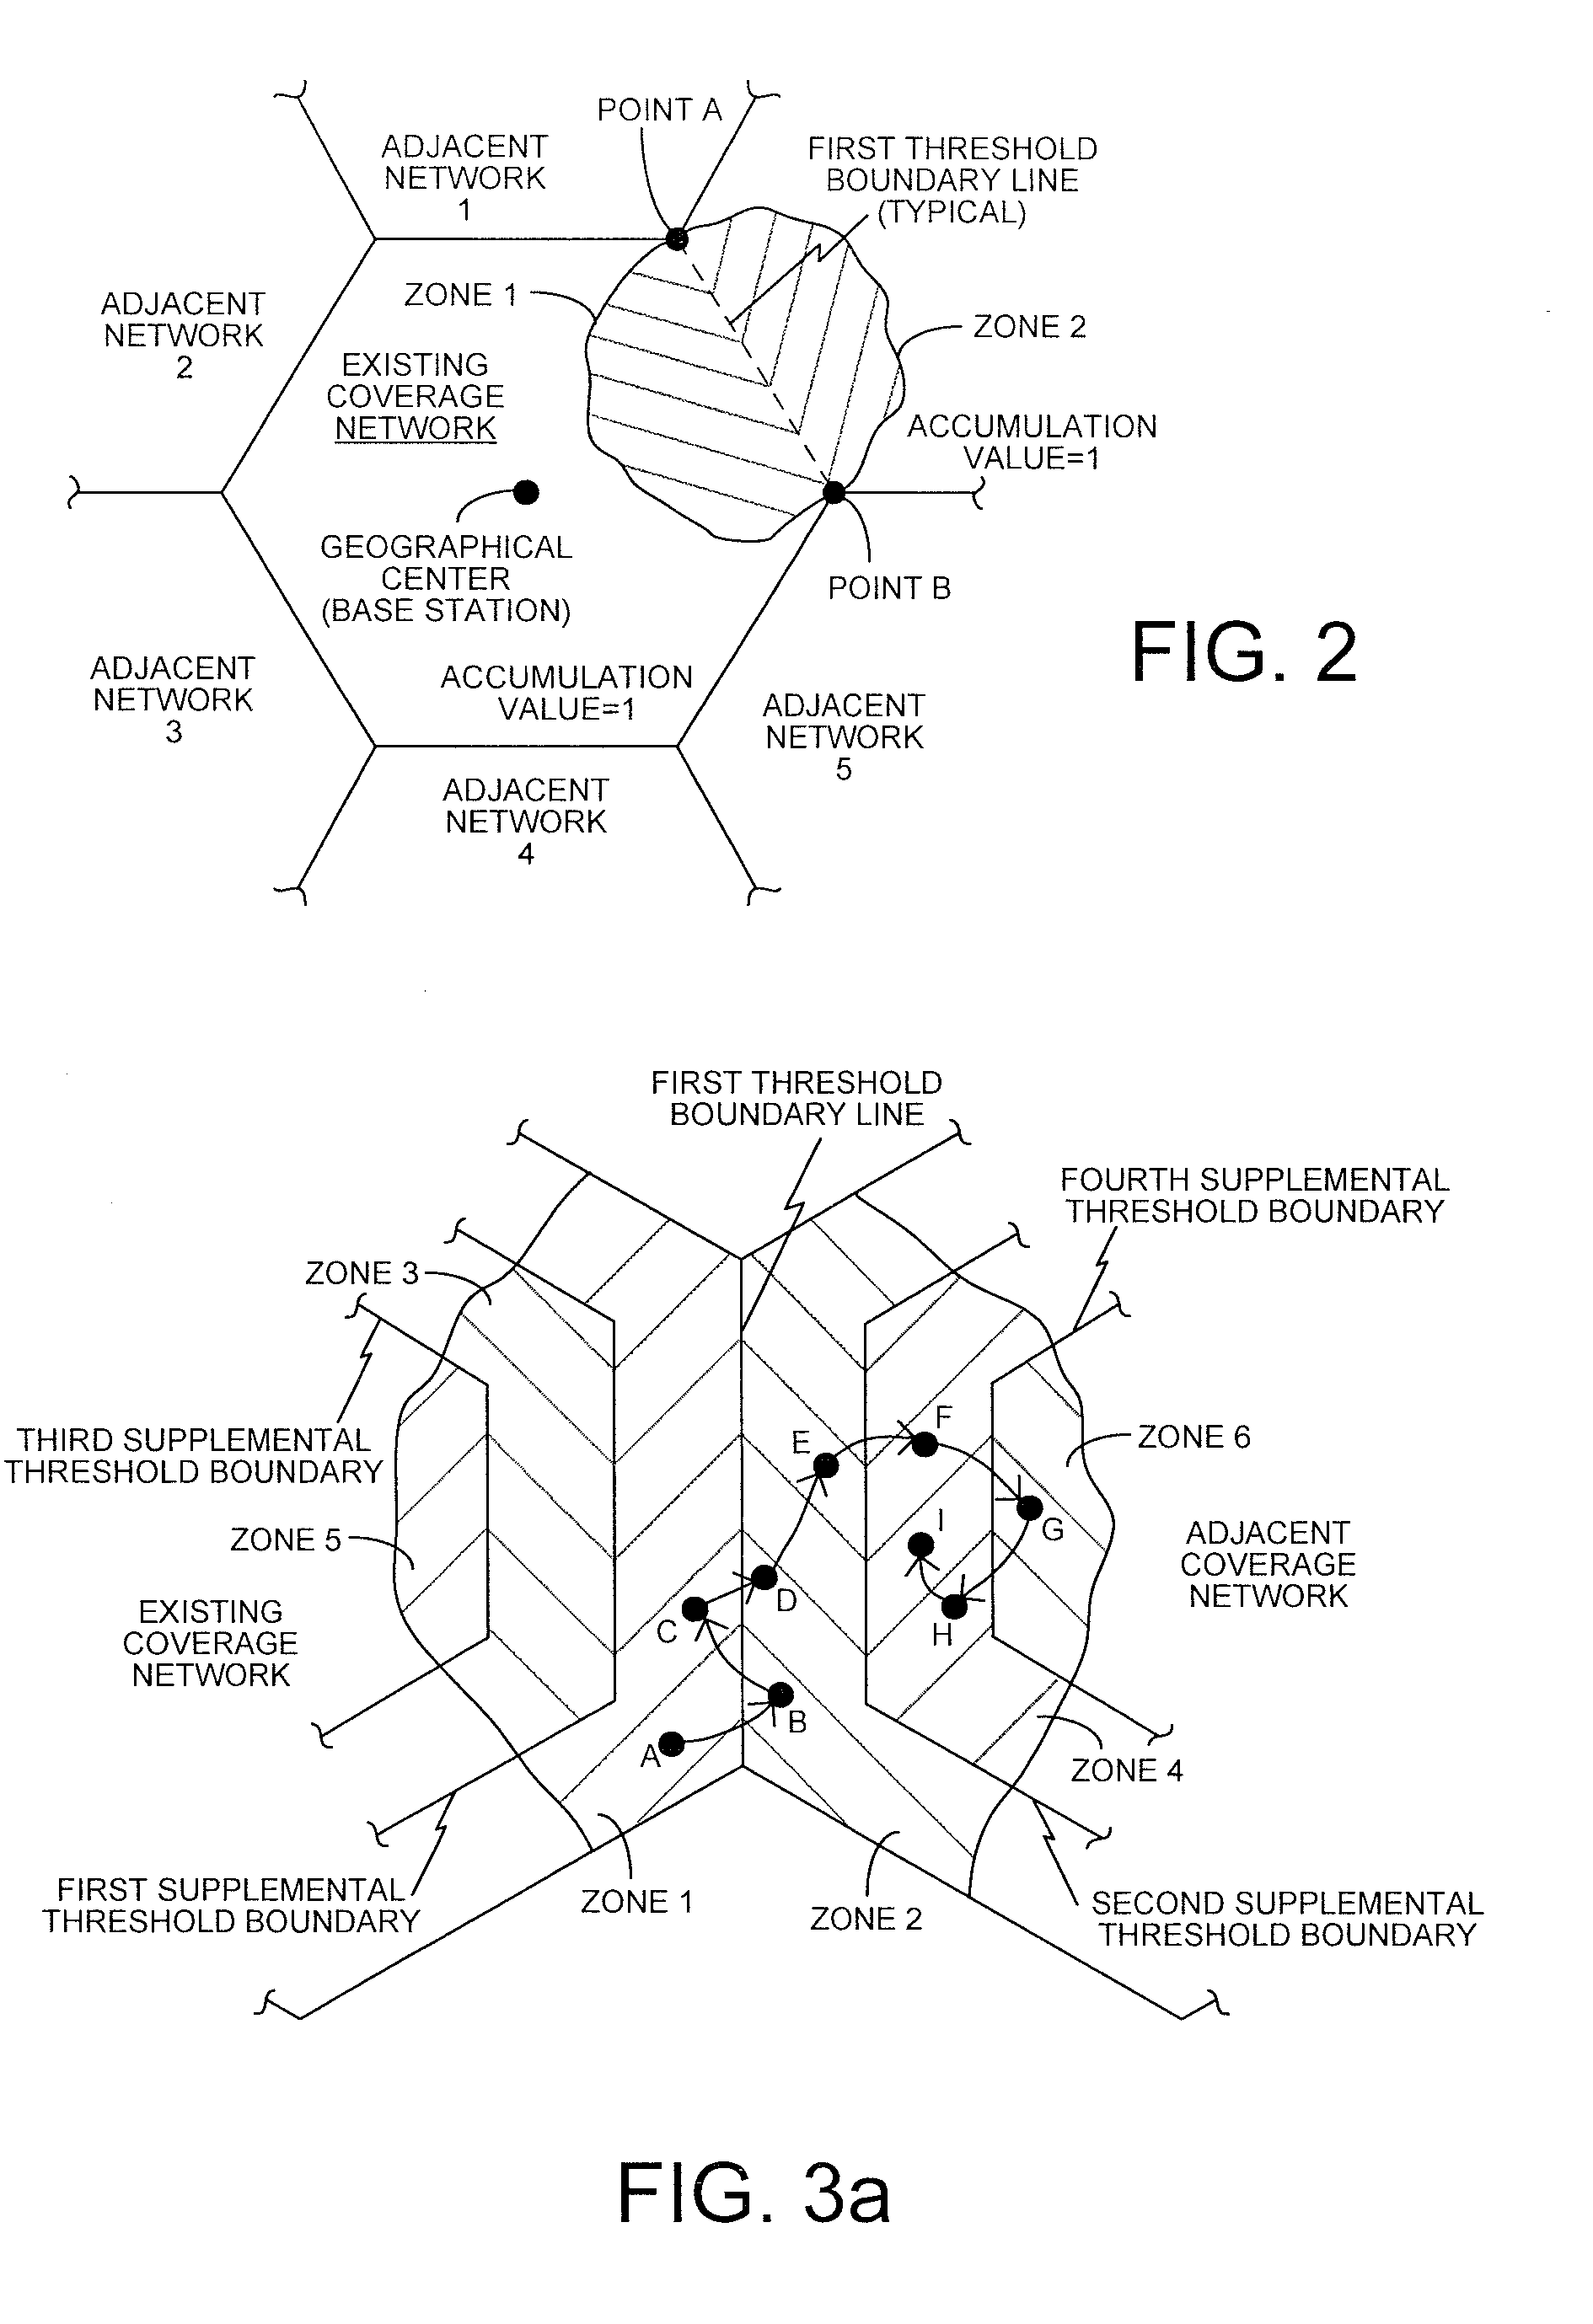 System and method for using geographical location to determine when to exit an existing wireless communications coverage network